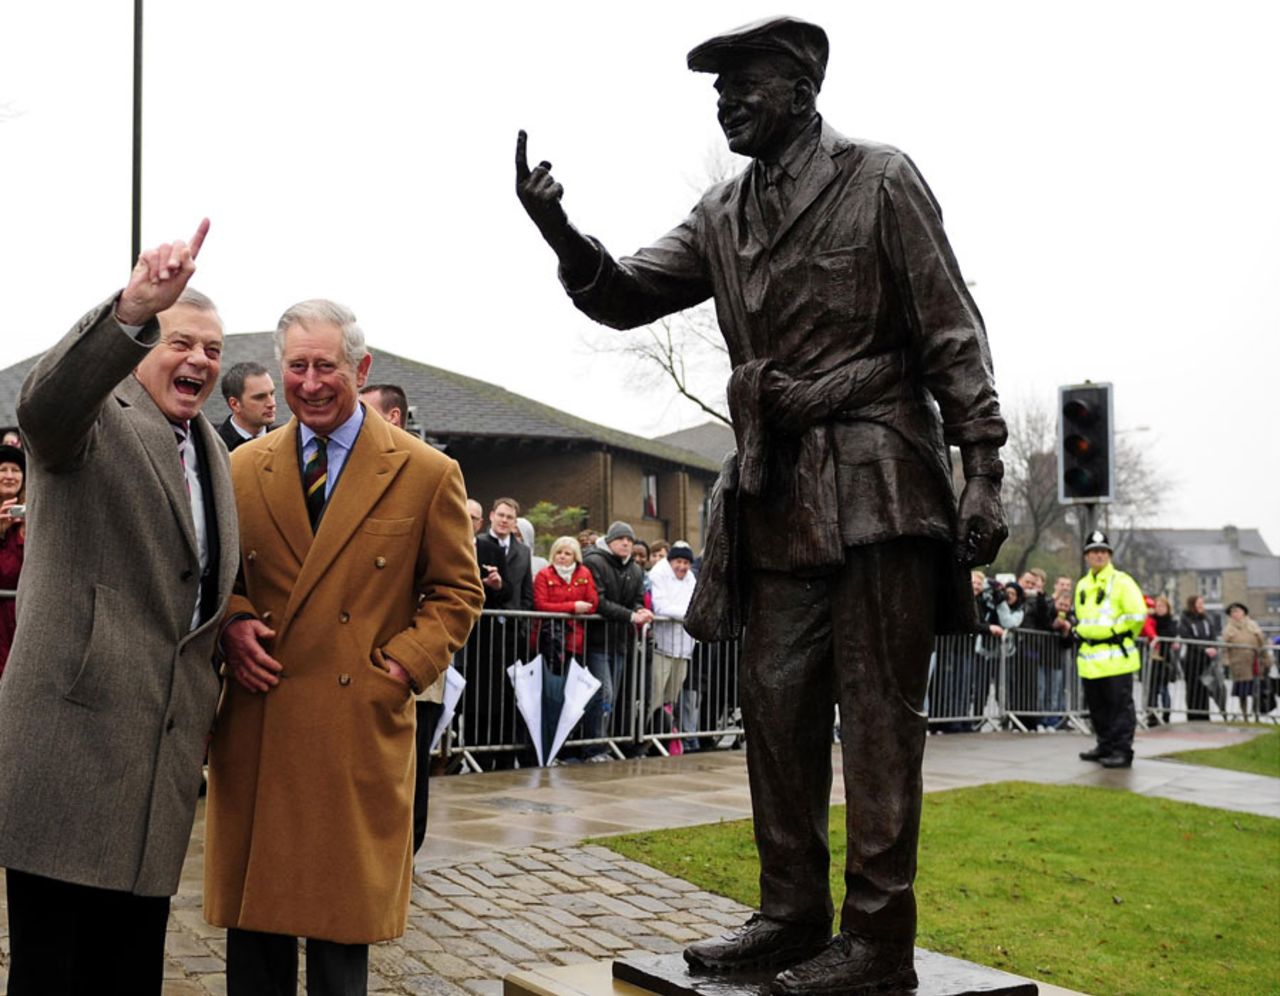 Dickie Bird and Prince Charles at the umpire's statue, Barnsley, January 24, 2012